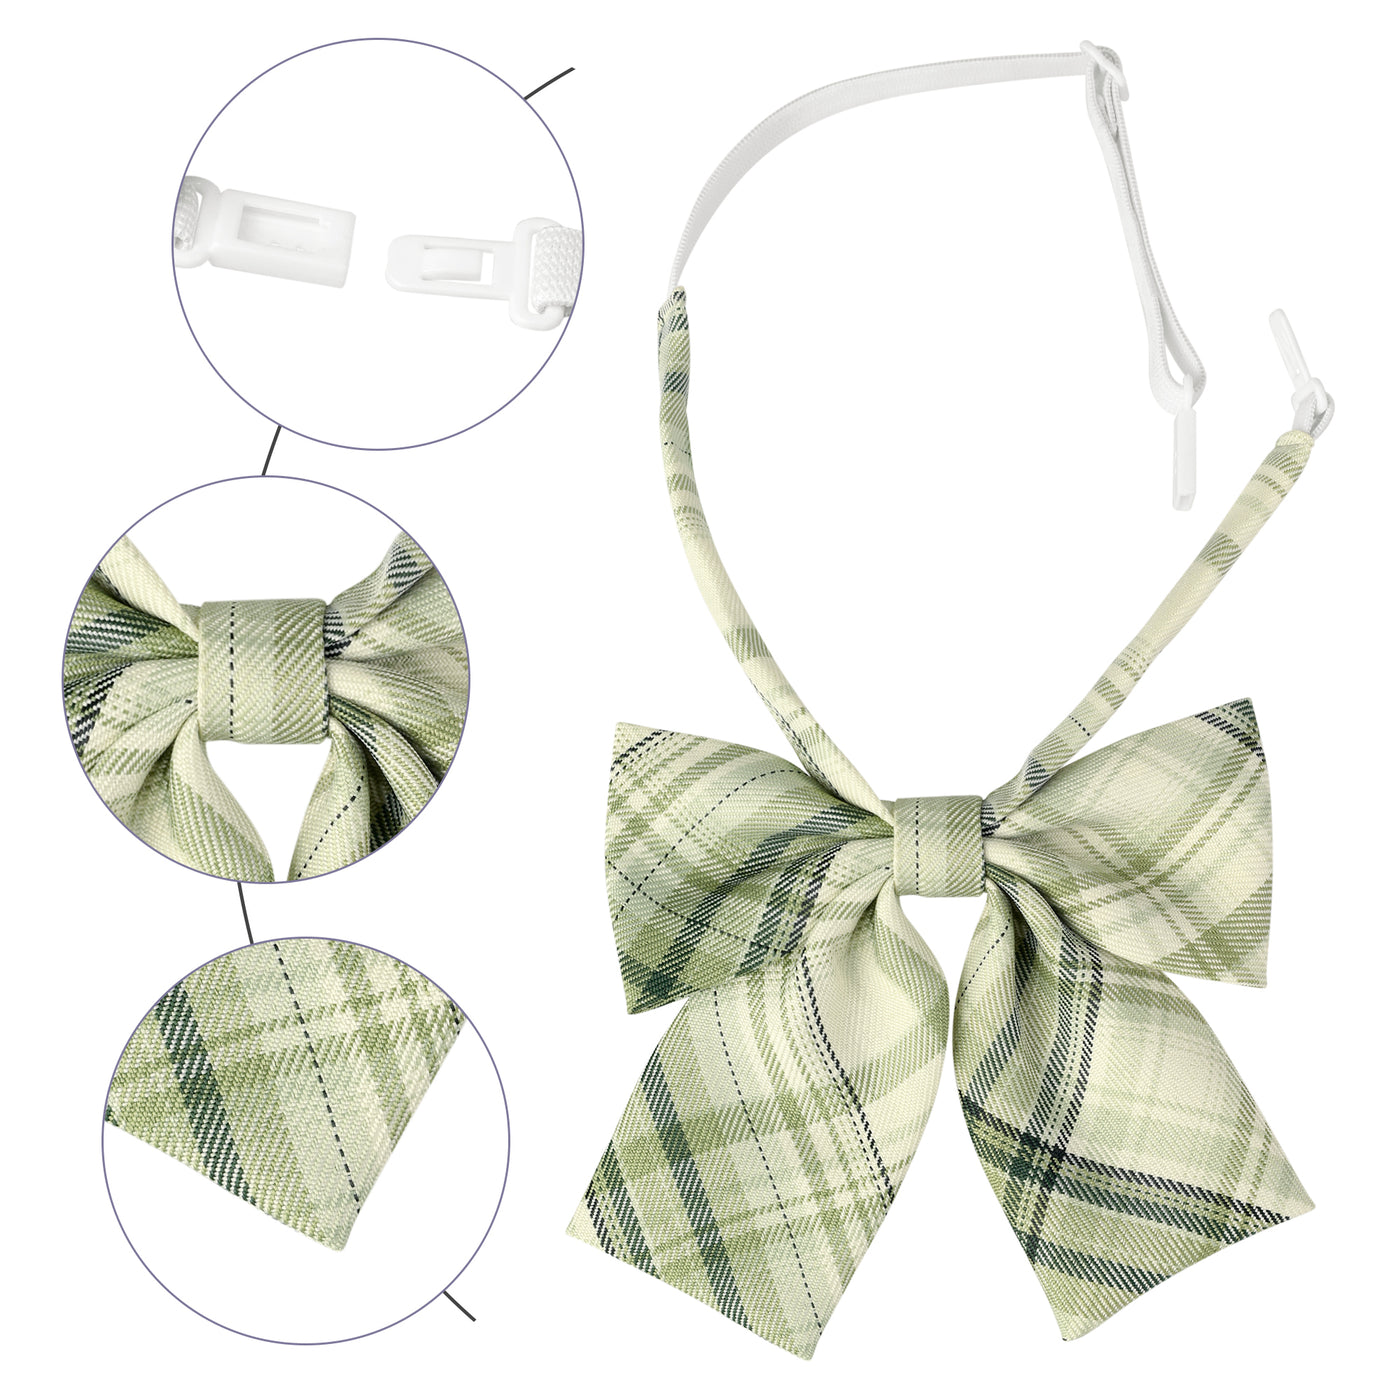 Bublédon Plaid Uniform Pre-tied Knot Cute Stylish Colorful Bow Ties for Women